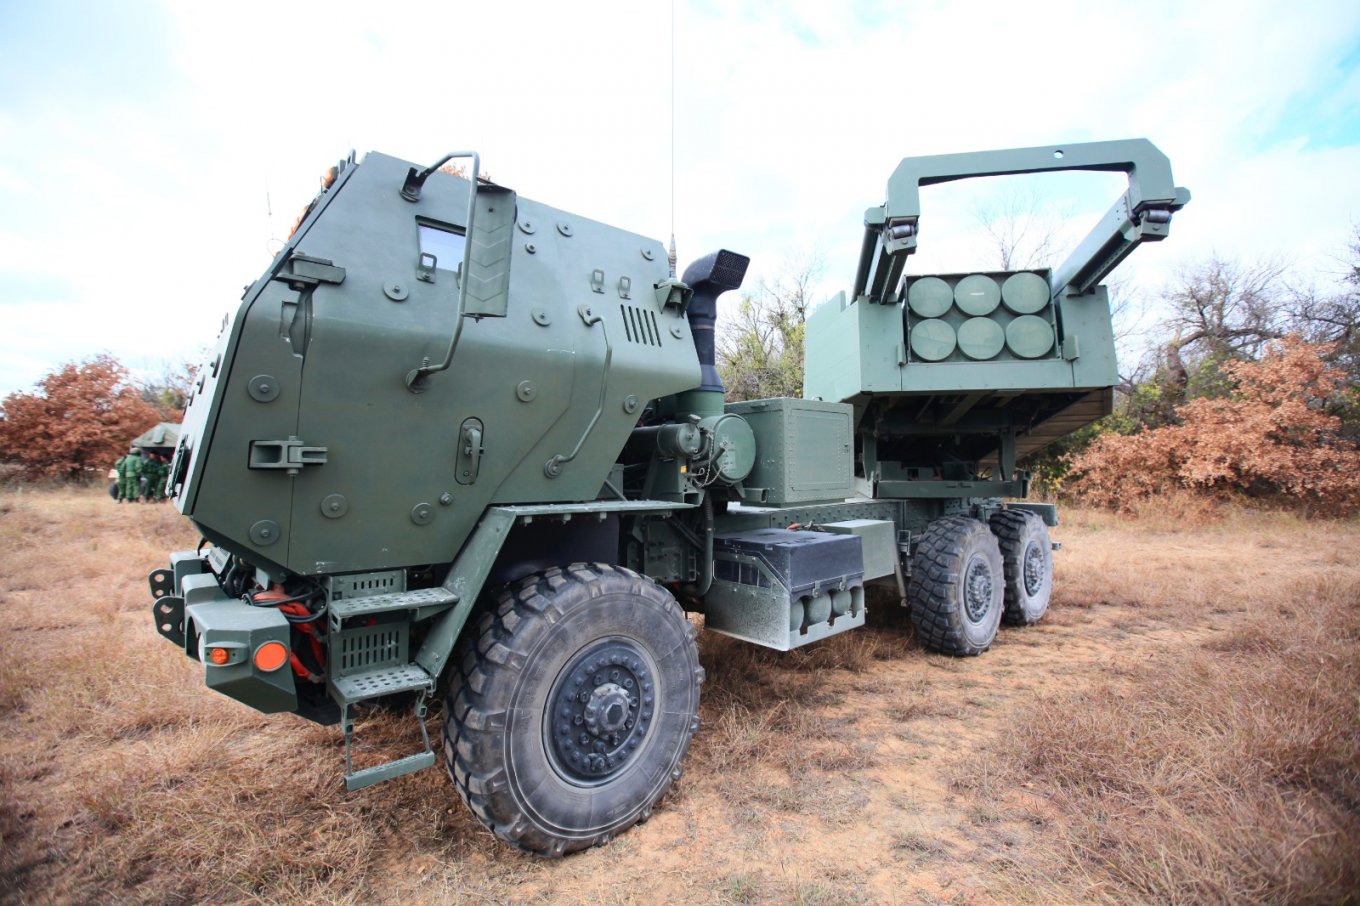 High Mobility Artillery Rocket Systems (HIMARS)